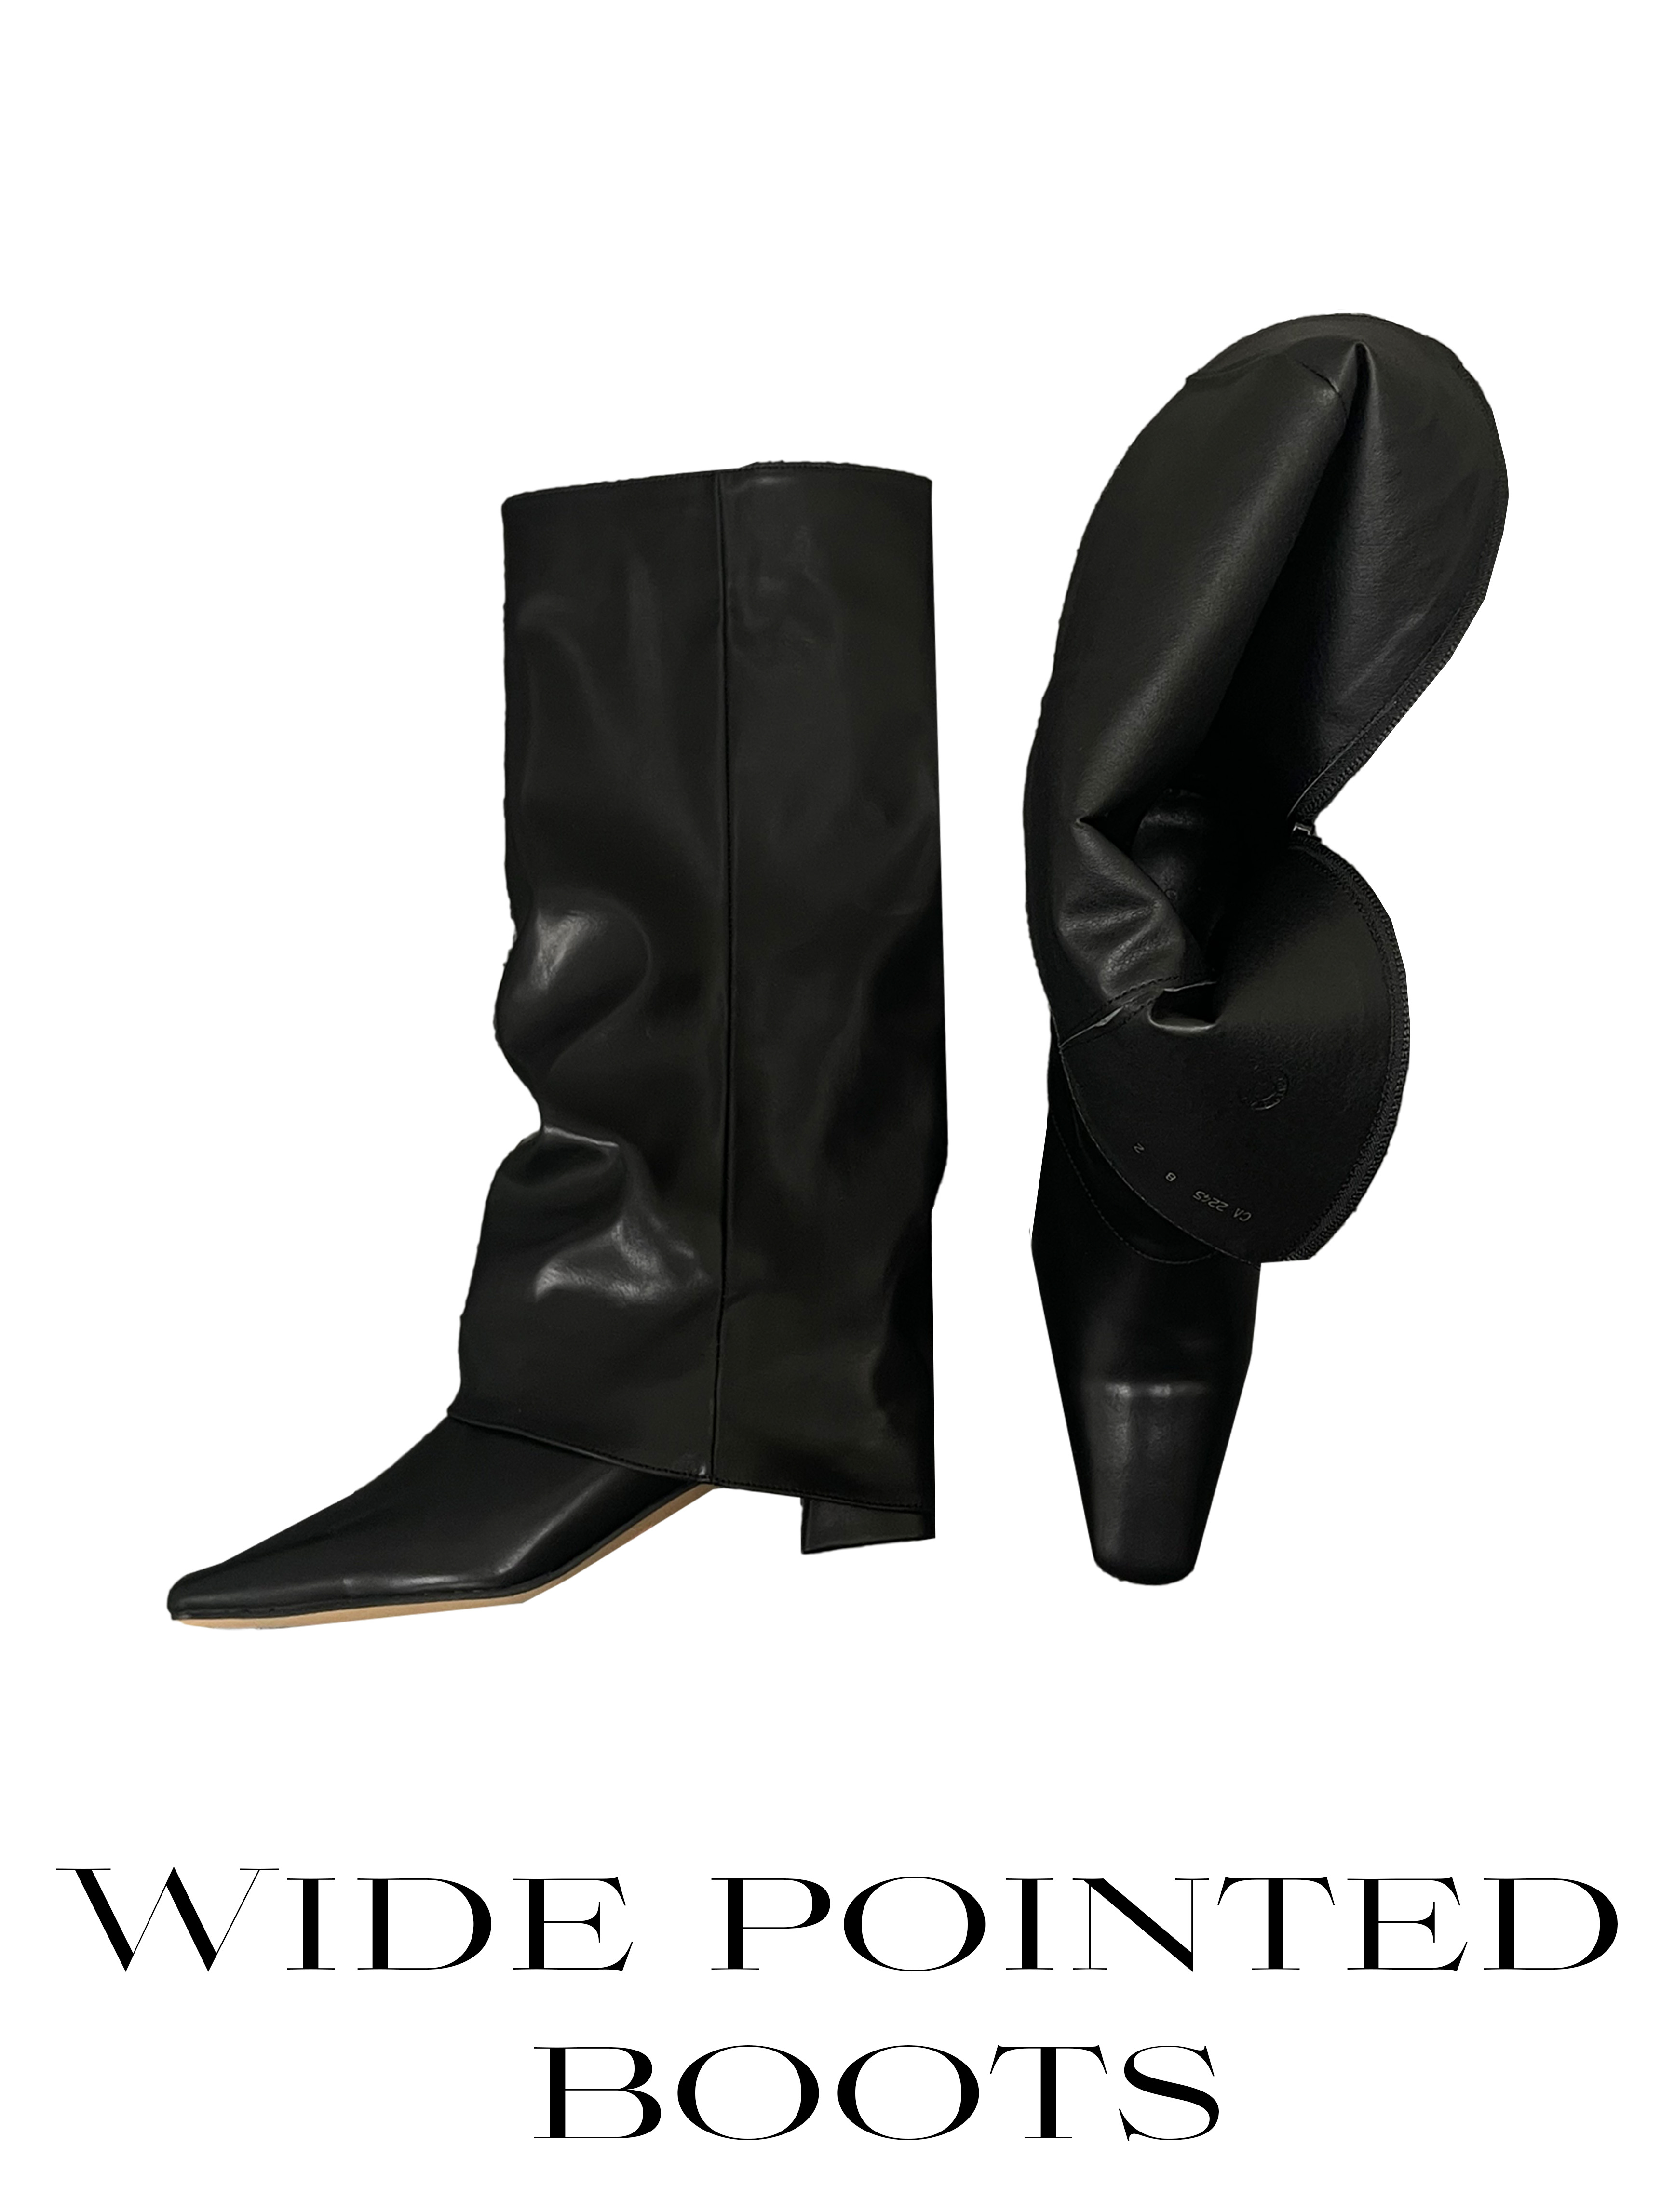 Wide pointed boots